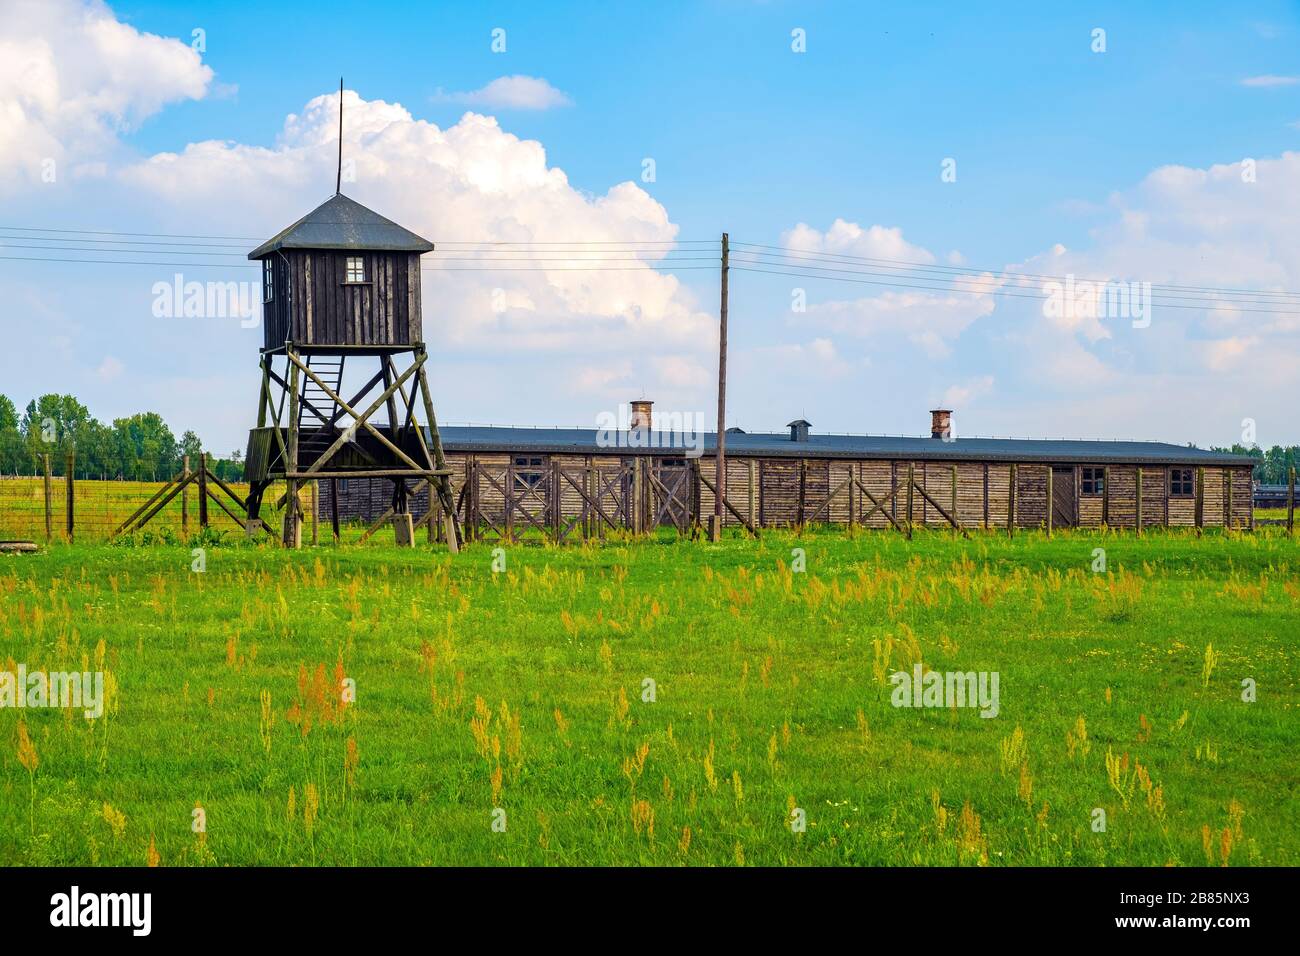 Lublin, Lubelskie / Poland - 2019/08/17: Panoramic view of the Majdanek KL Lublin Nazis concentration camp with guards towers and barbed-wire fences Stock Photo